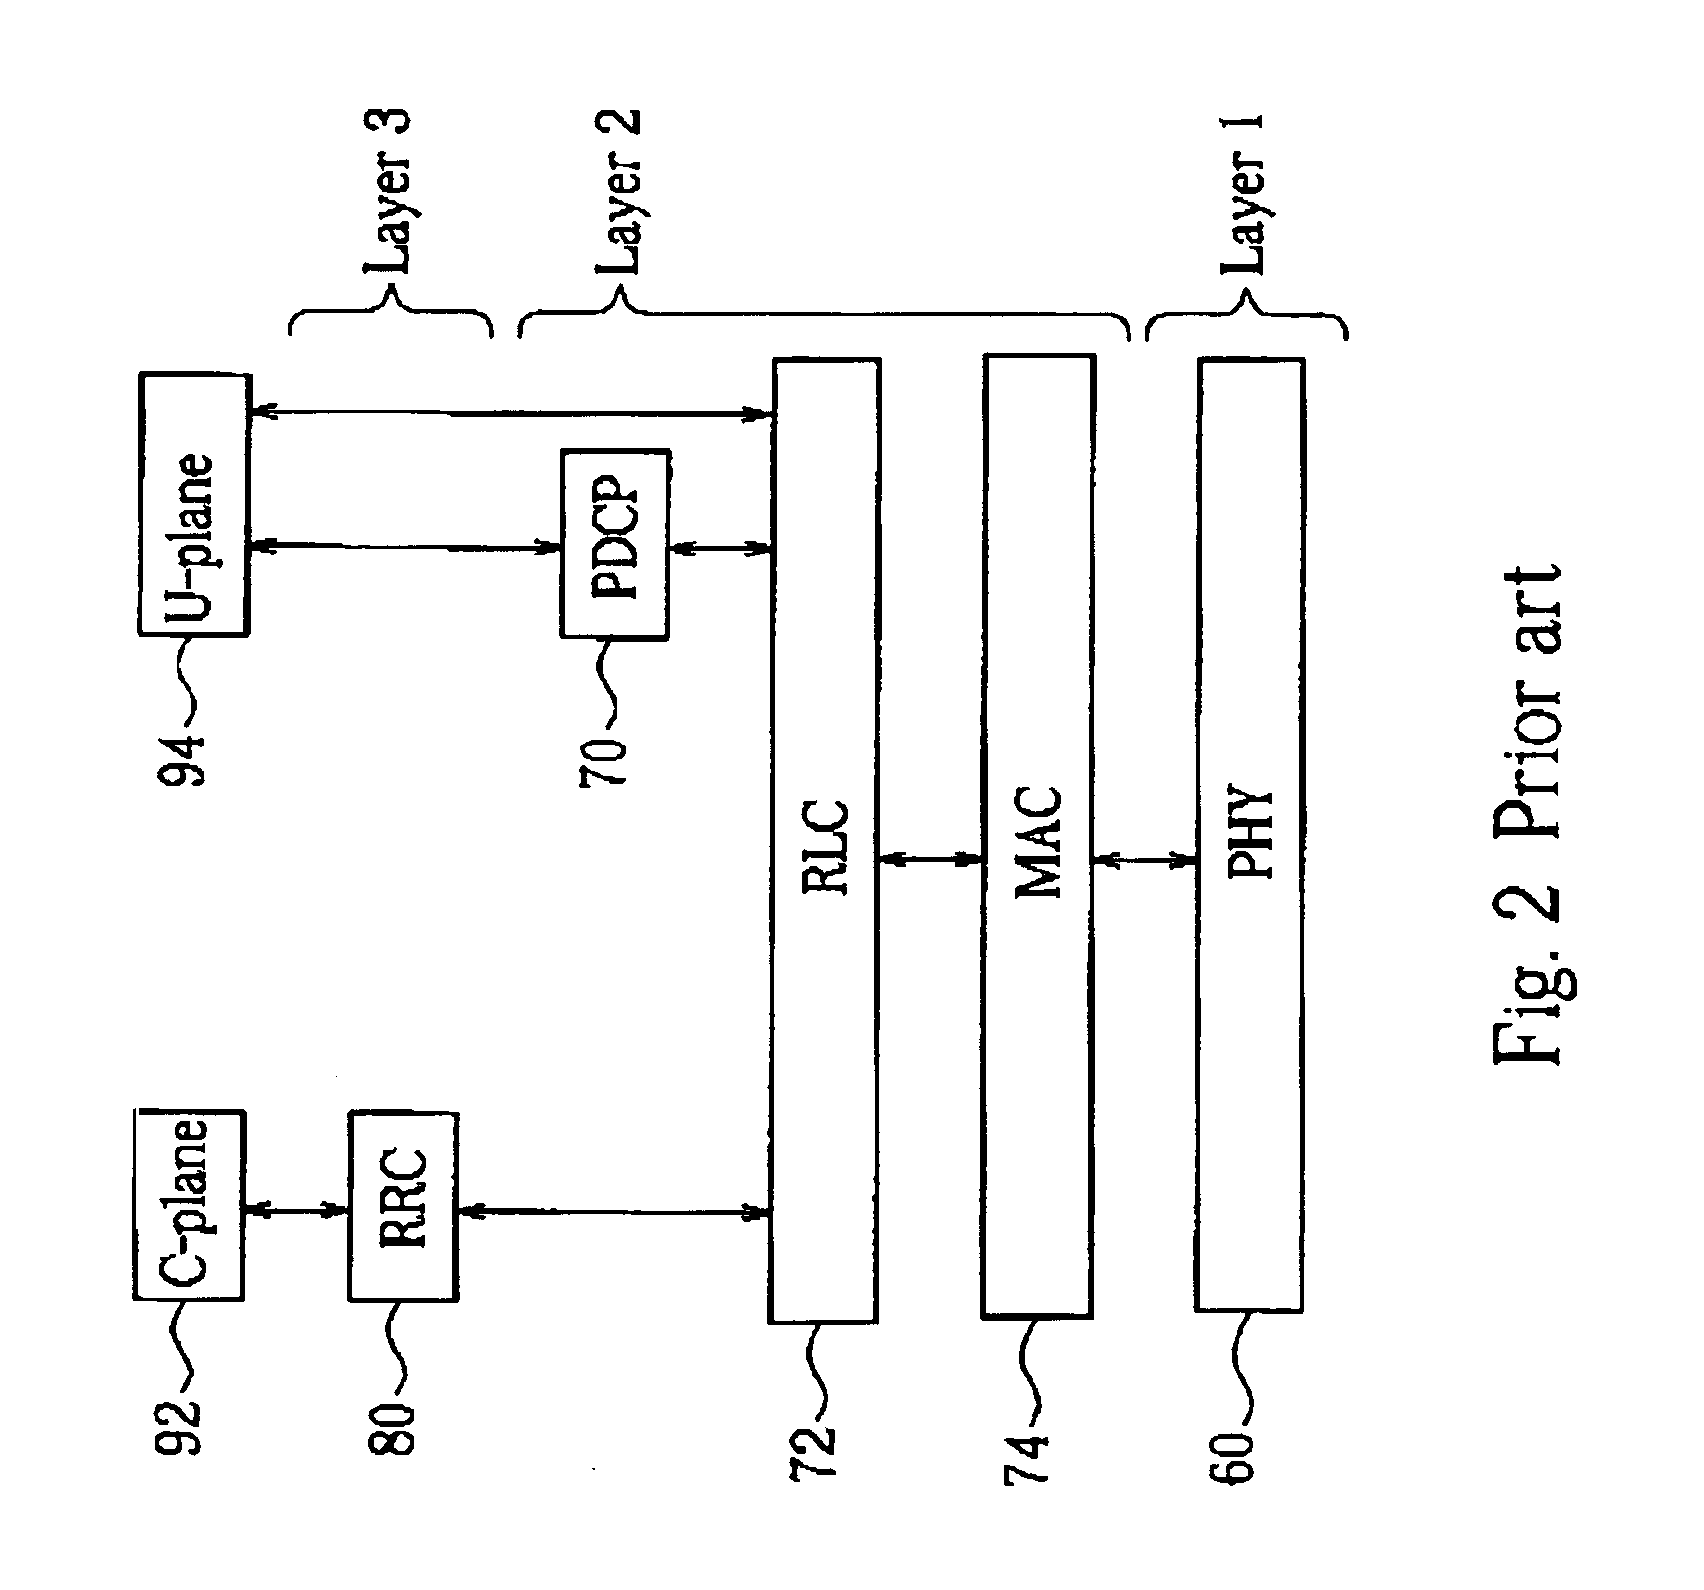 Handling of a wireless device re-entering a service area